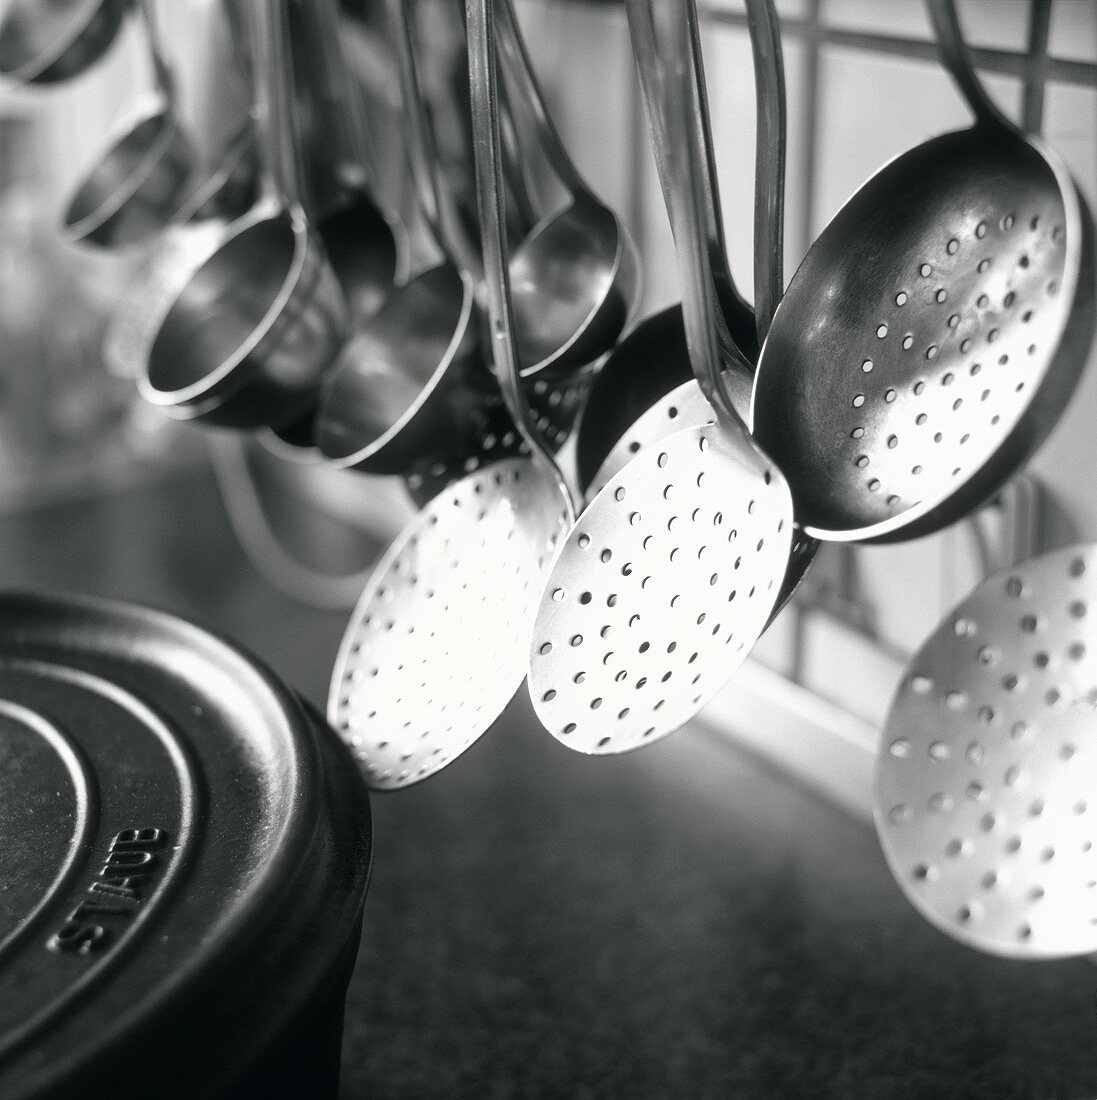 Ladles and skimmers hanging on a rack